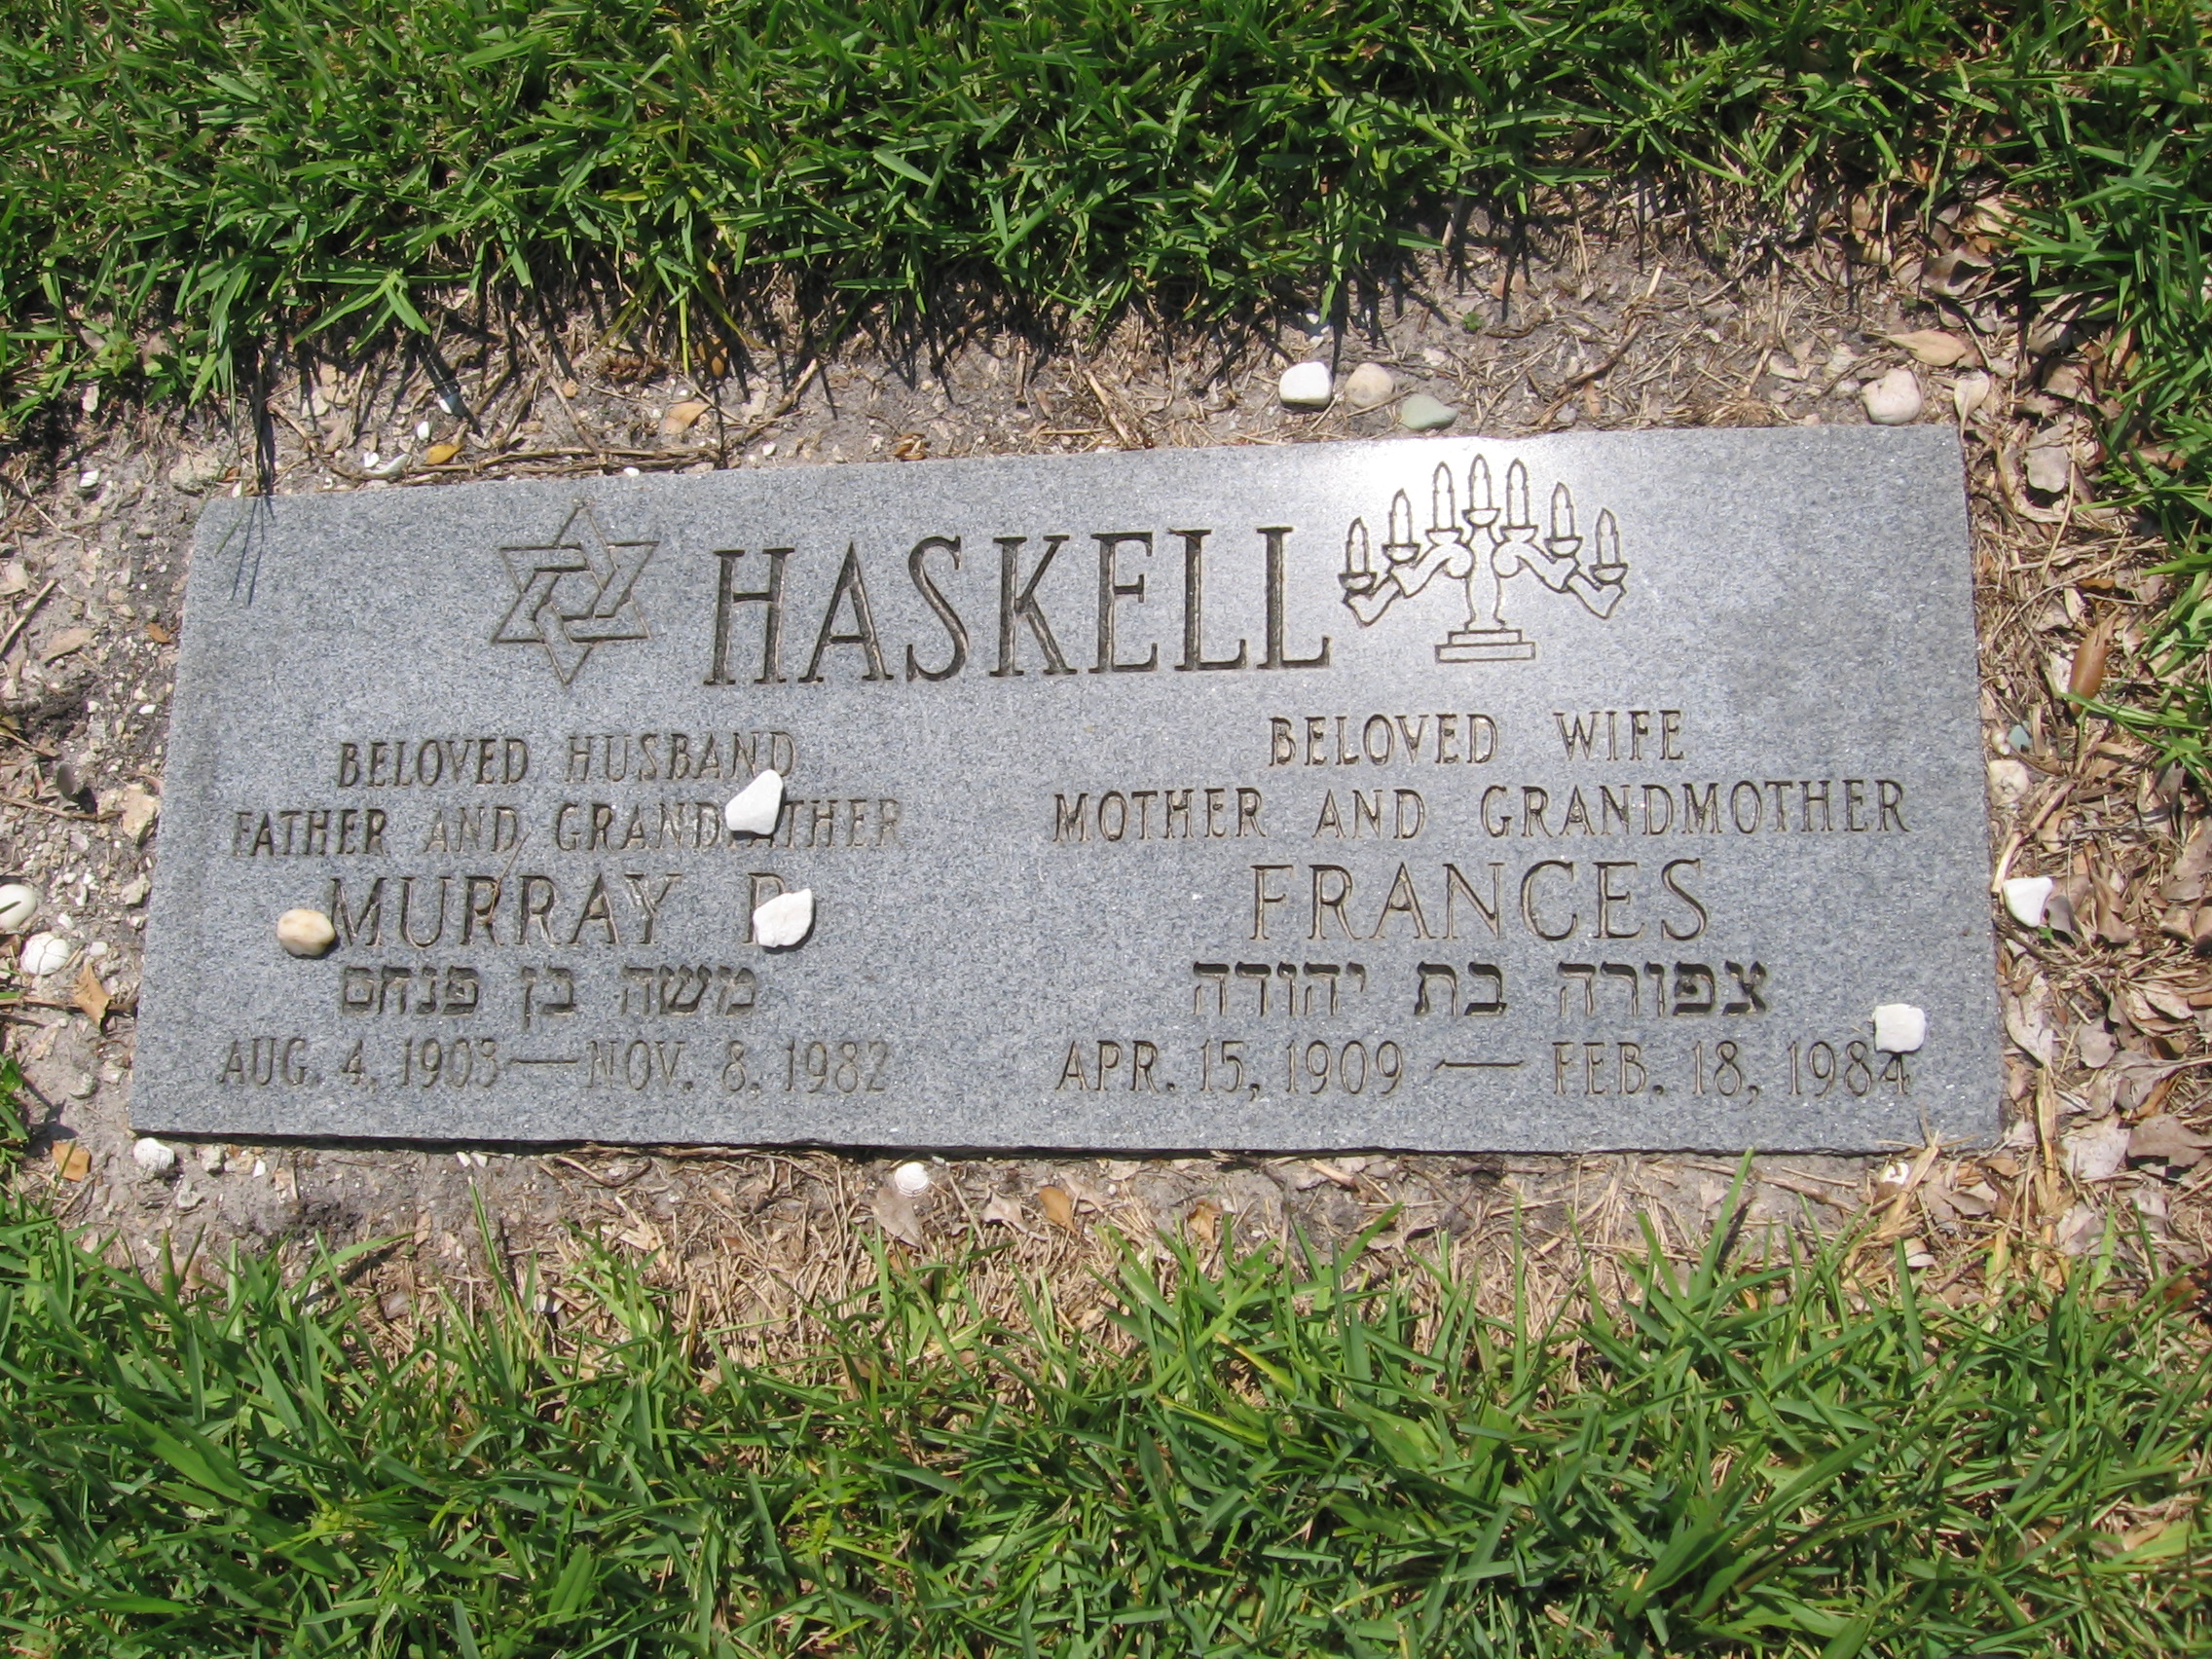 Murray D Haskell